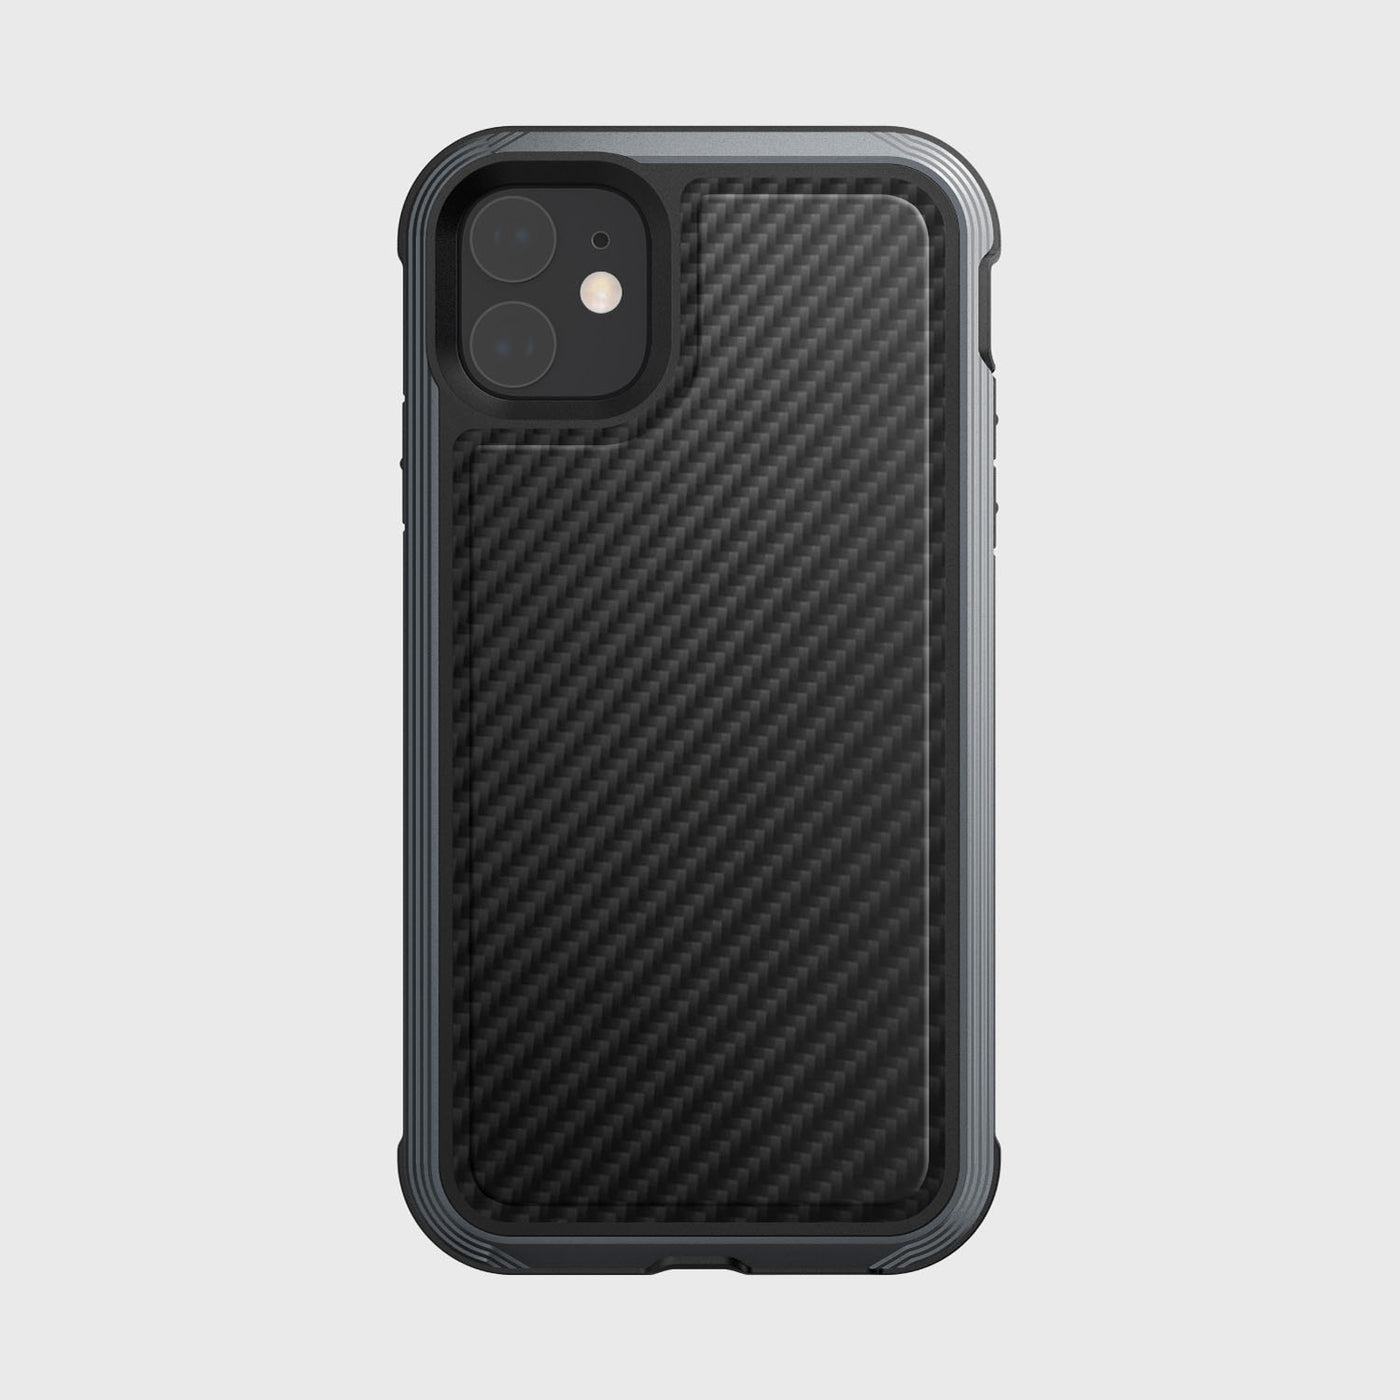 Luxurious Case for iPhone 11. Raptic Lux in black carbon fiber.